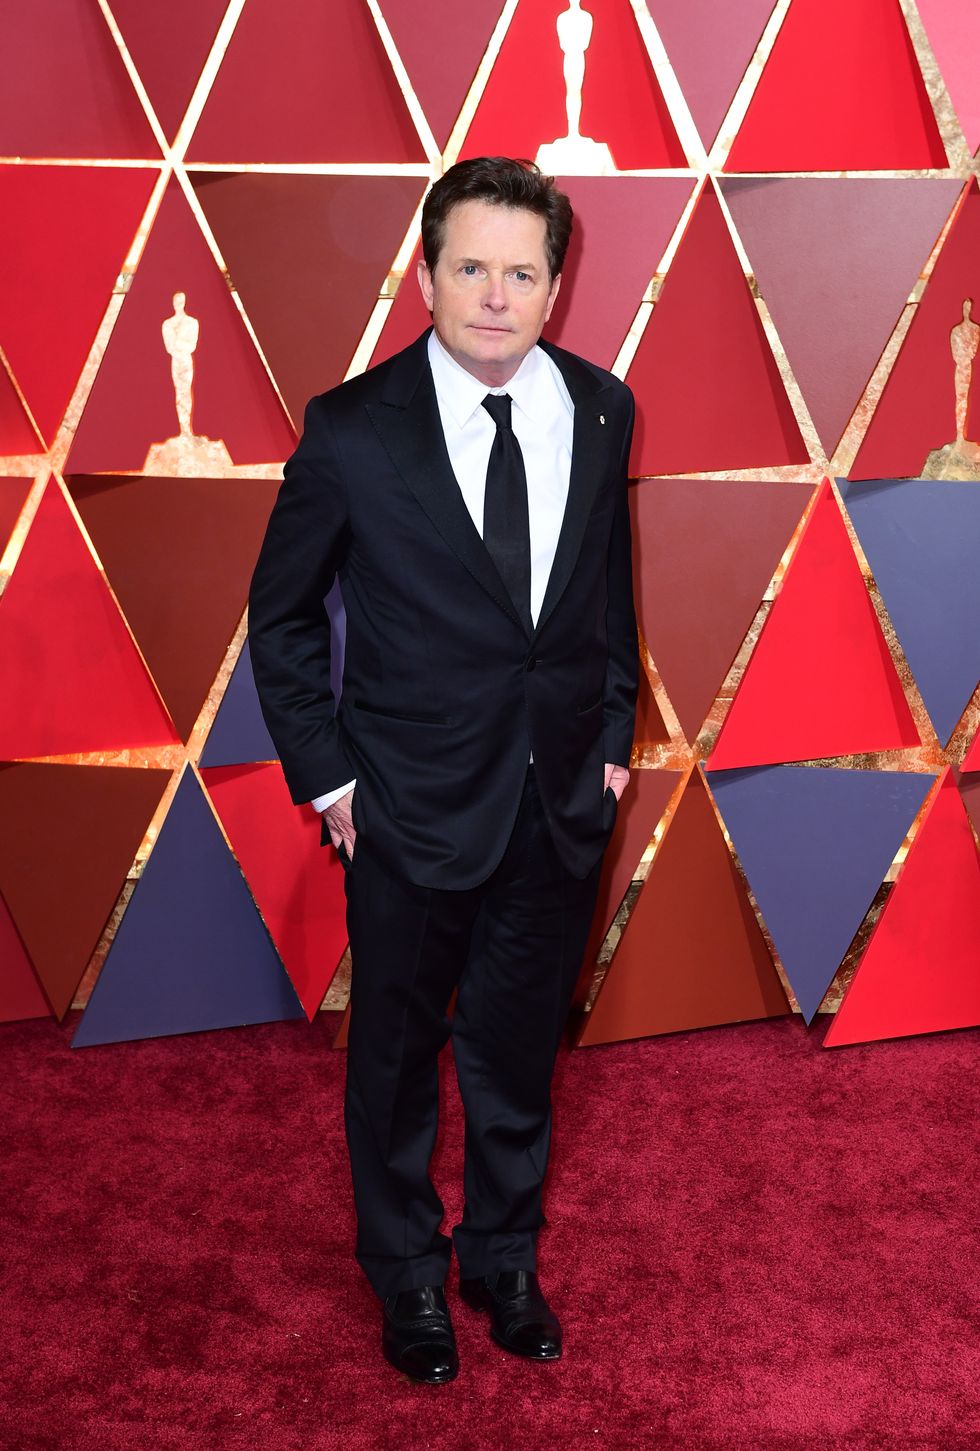 Michael J Fox given standing ovation after surprise appearance at Bafta awards